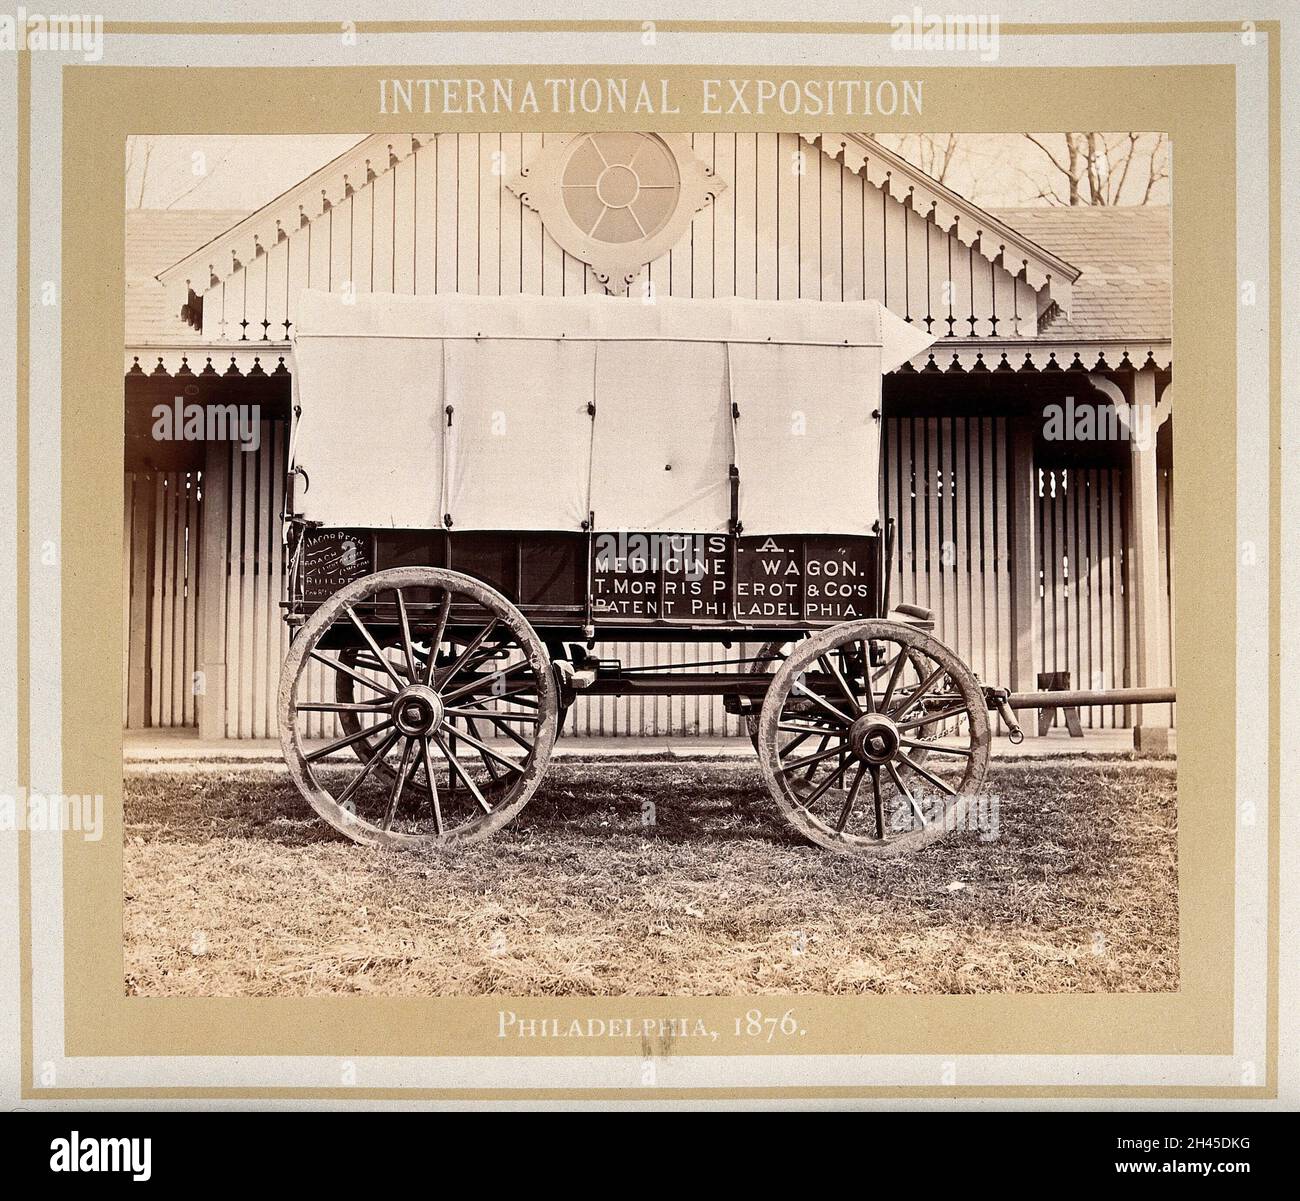 Philadelphia International Exposition, 1876: American Civil War medicine wagon produced by T. Morris Perot and Company: side view. Photograph, 1876. Stock Photo